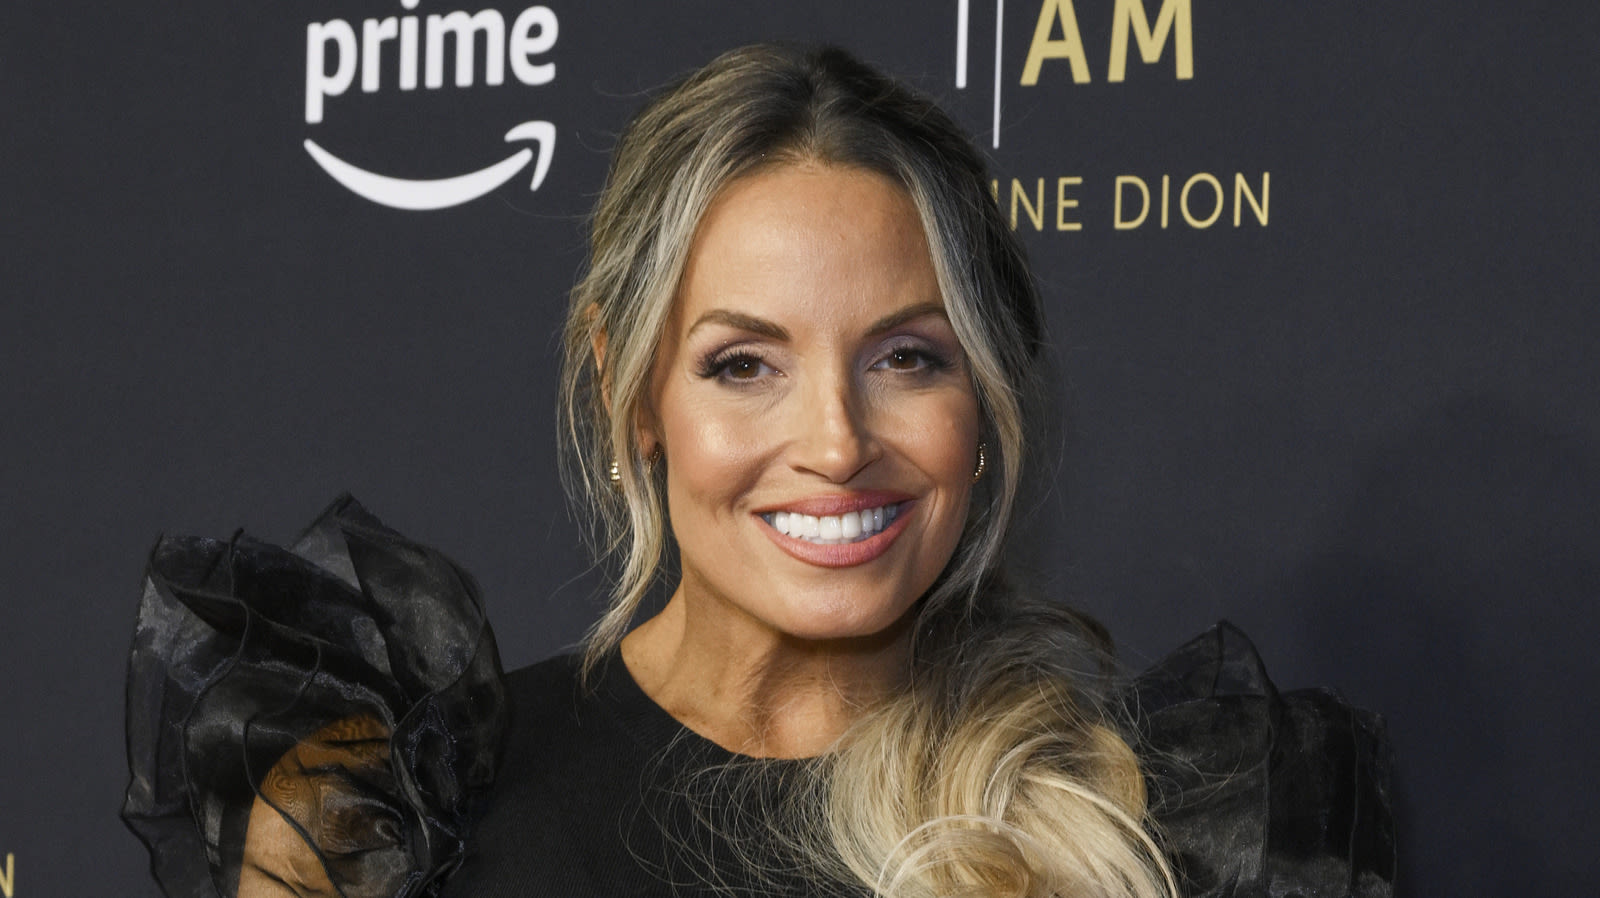 WWE Hall Of Famer Trish Stratus Explains Why She Turned Down Playboy Offers - Wrestling Inc.